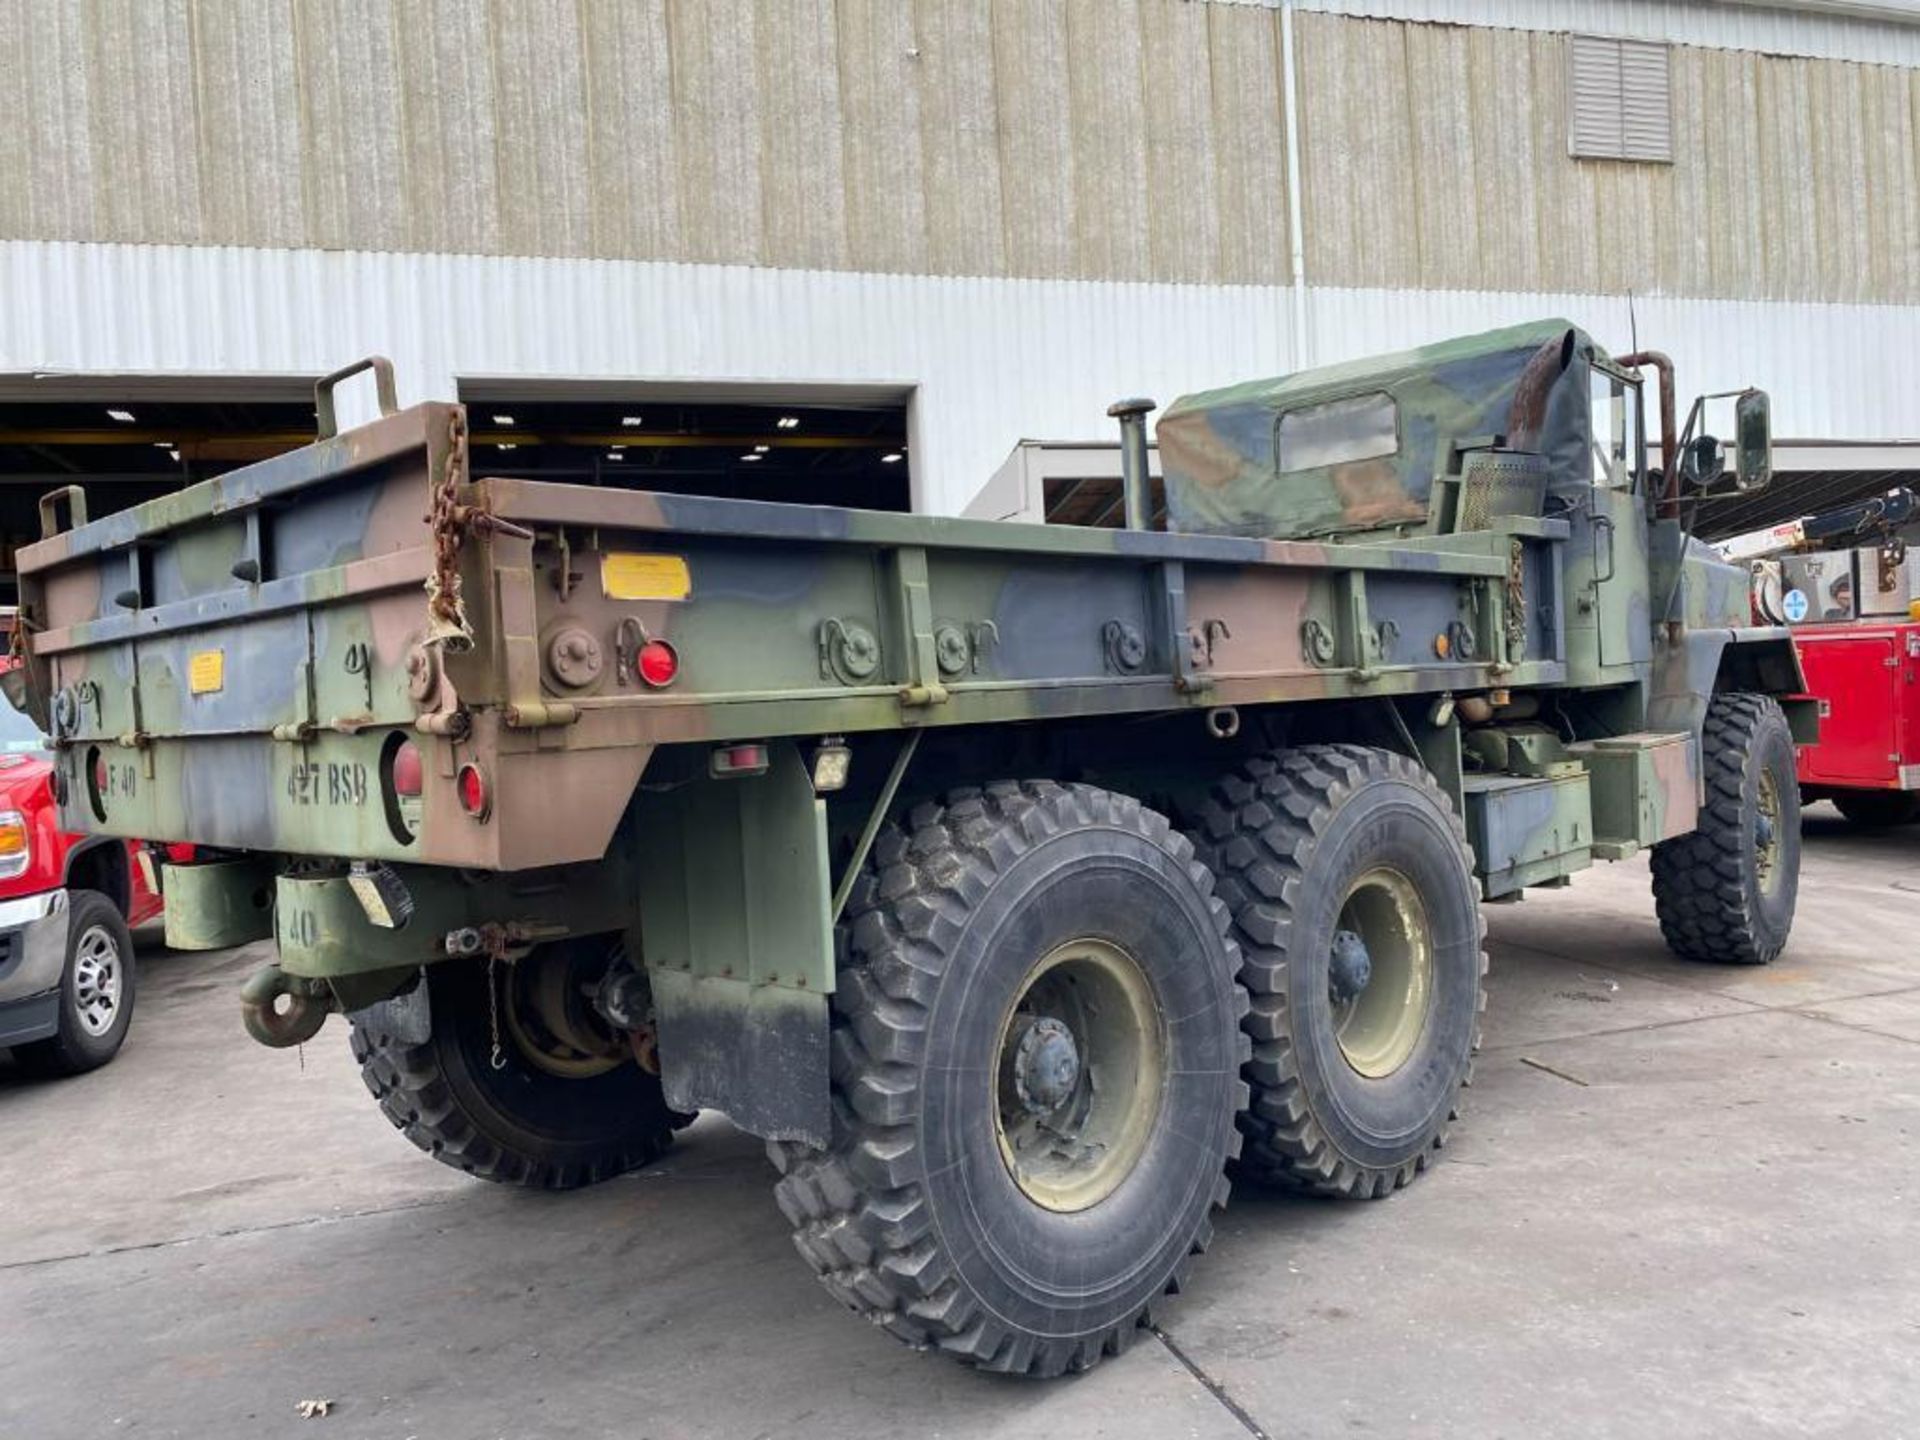 1985 AM GENERAL 2-1/2-Ton 6X6 Military Vehicle - Image 54 of 56